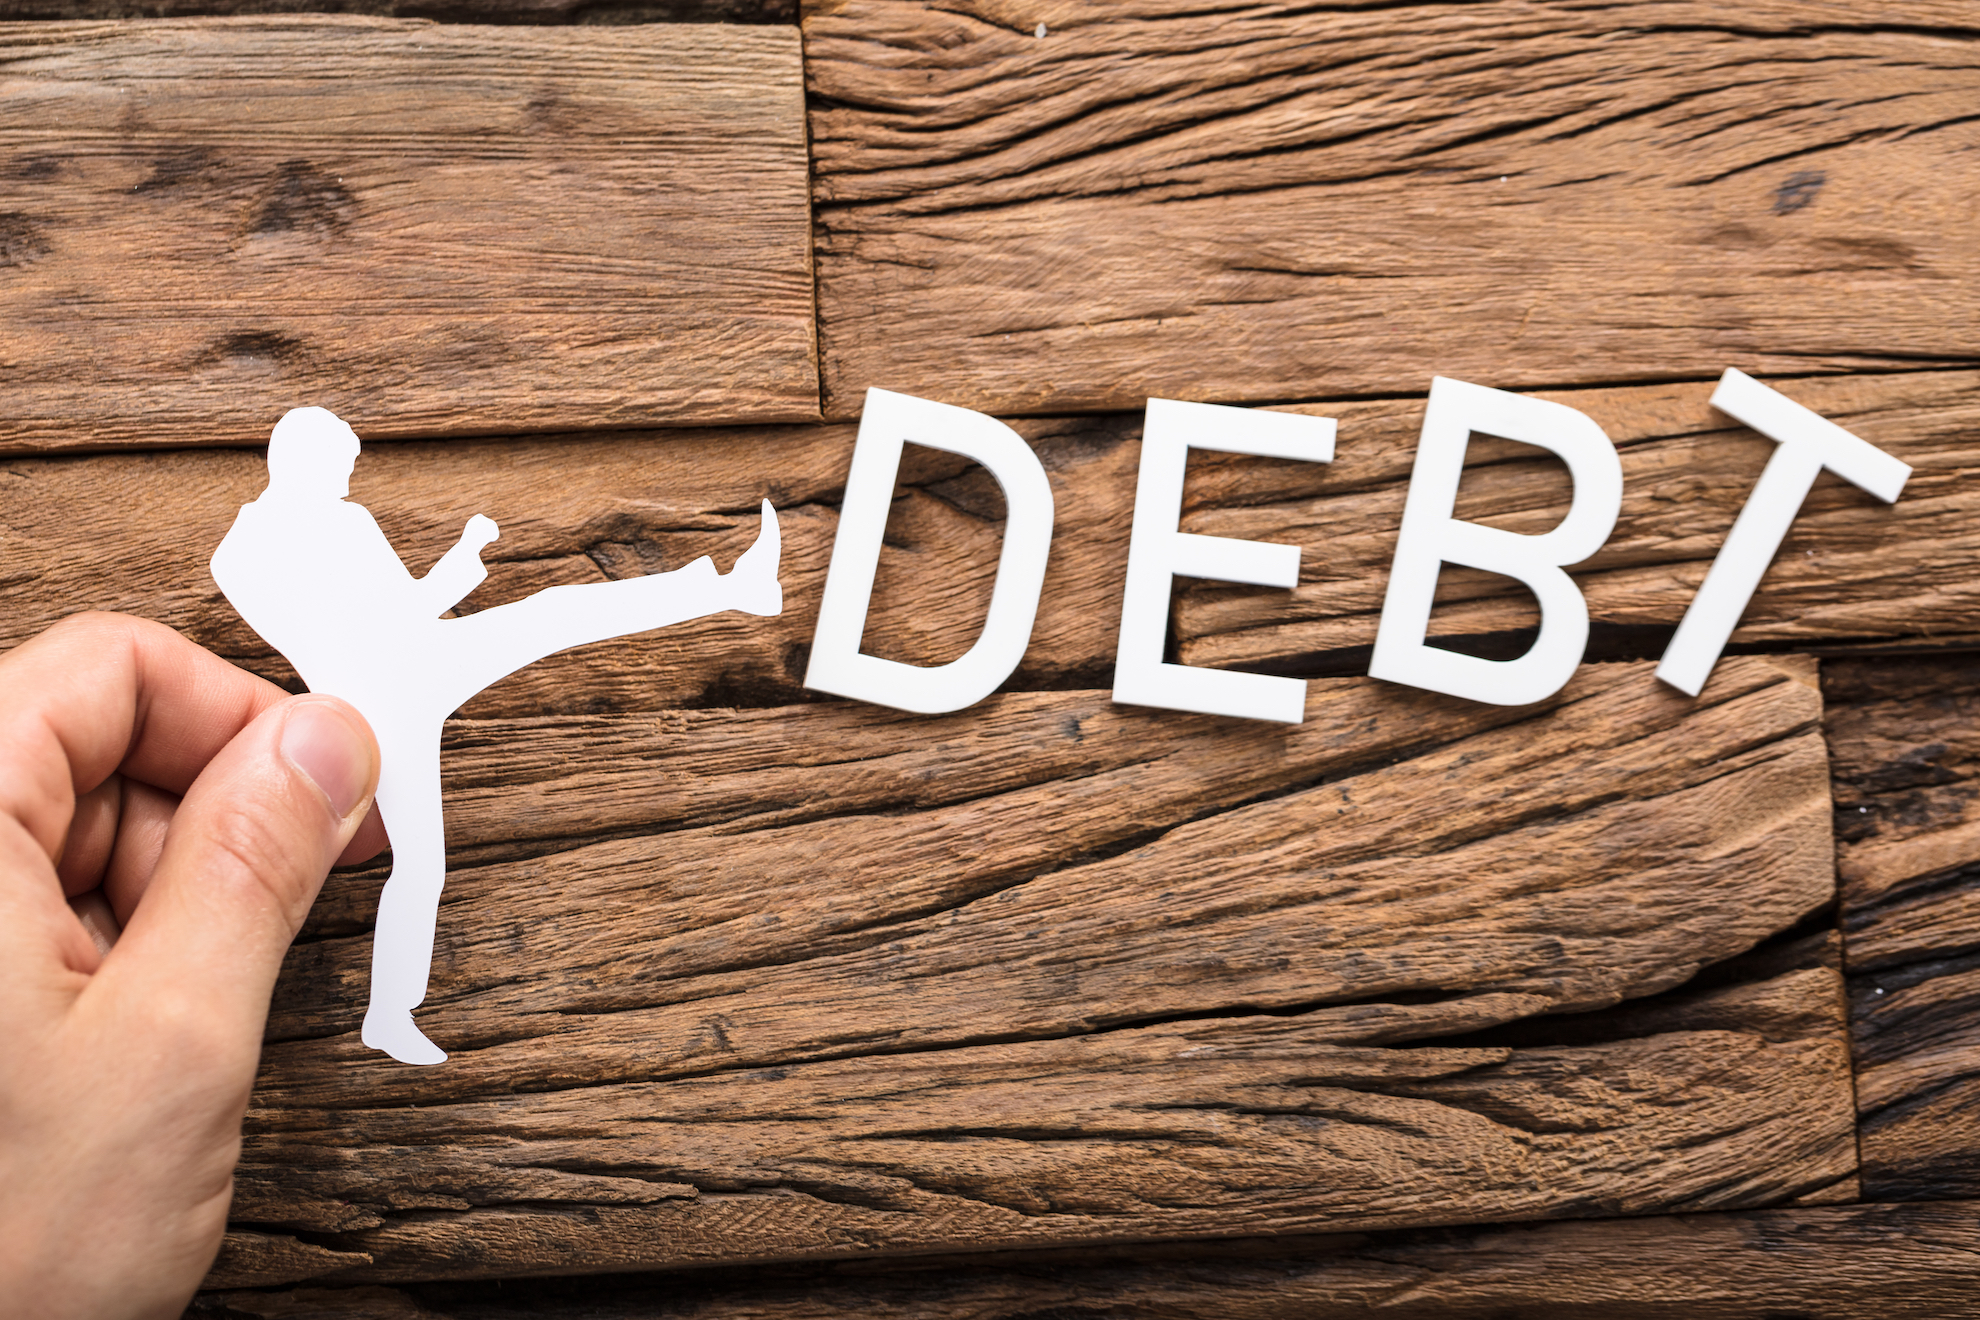 Hand Holding A Paper Cut Out Figure Kicking The Debt Word On Wooden Table